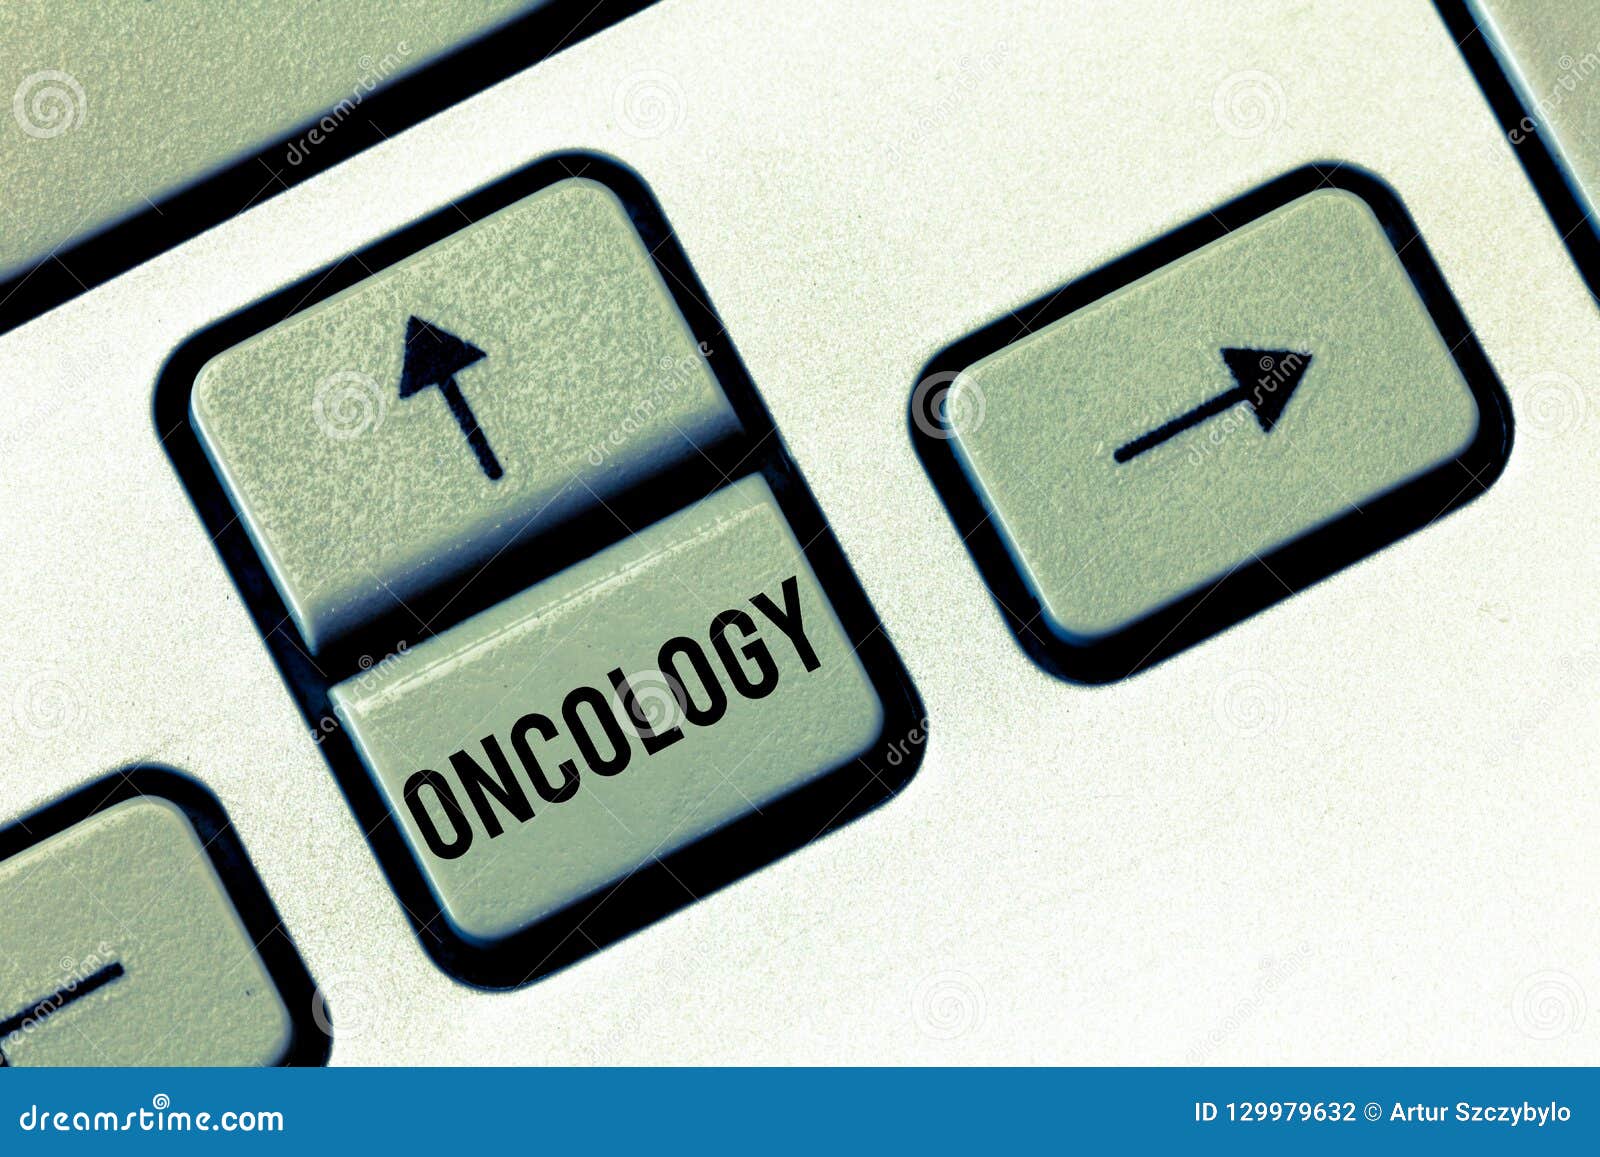 Oncology meaning